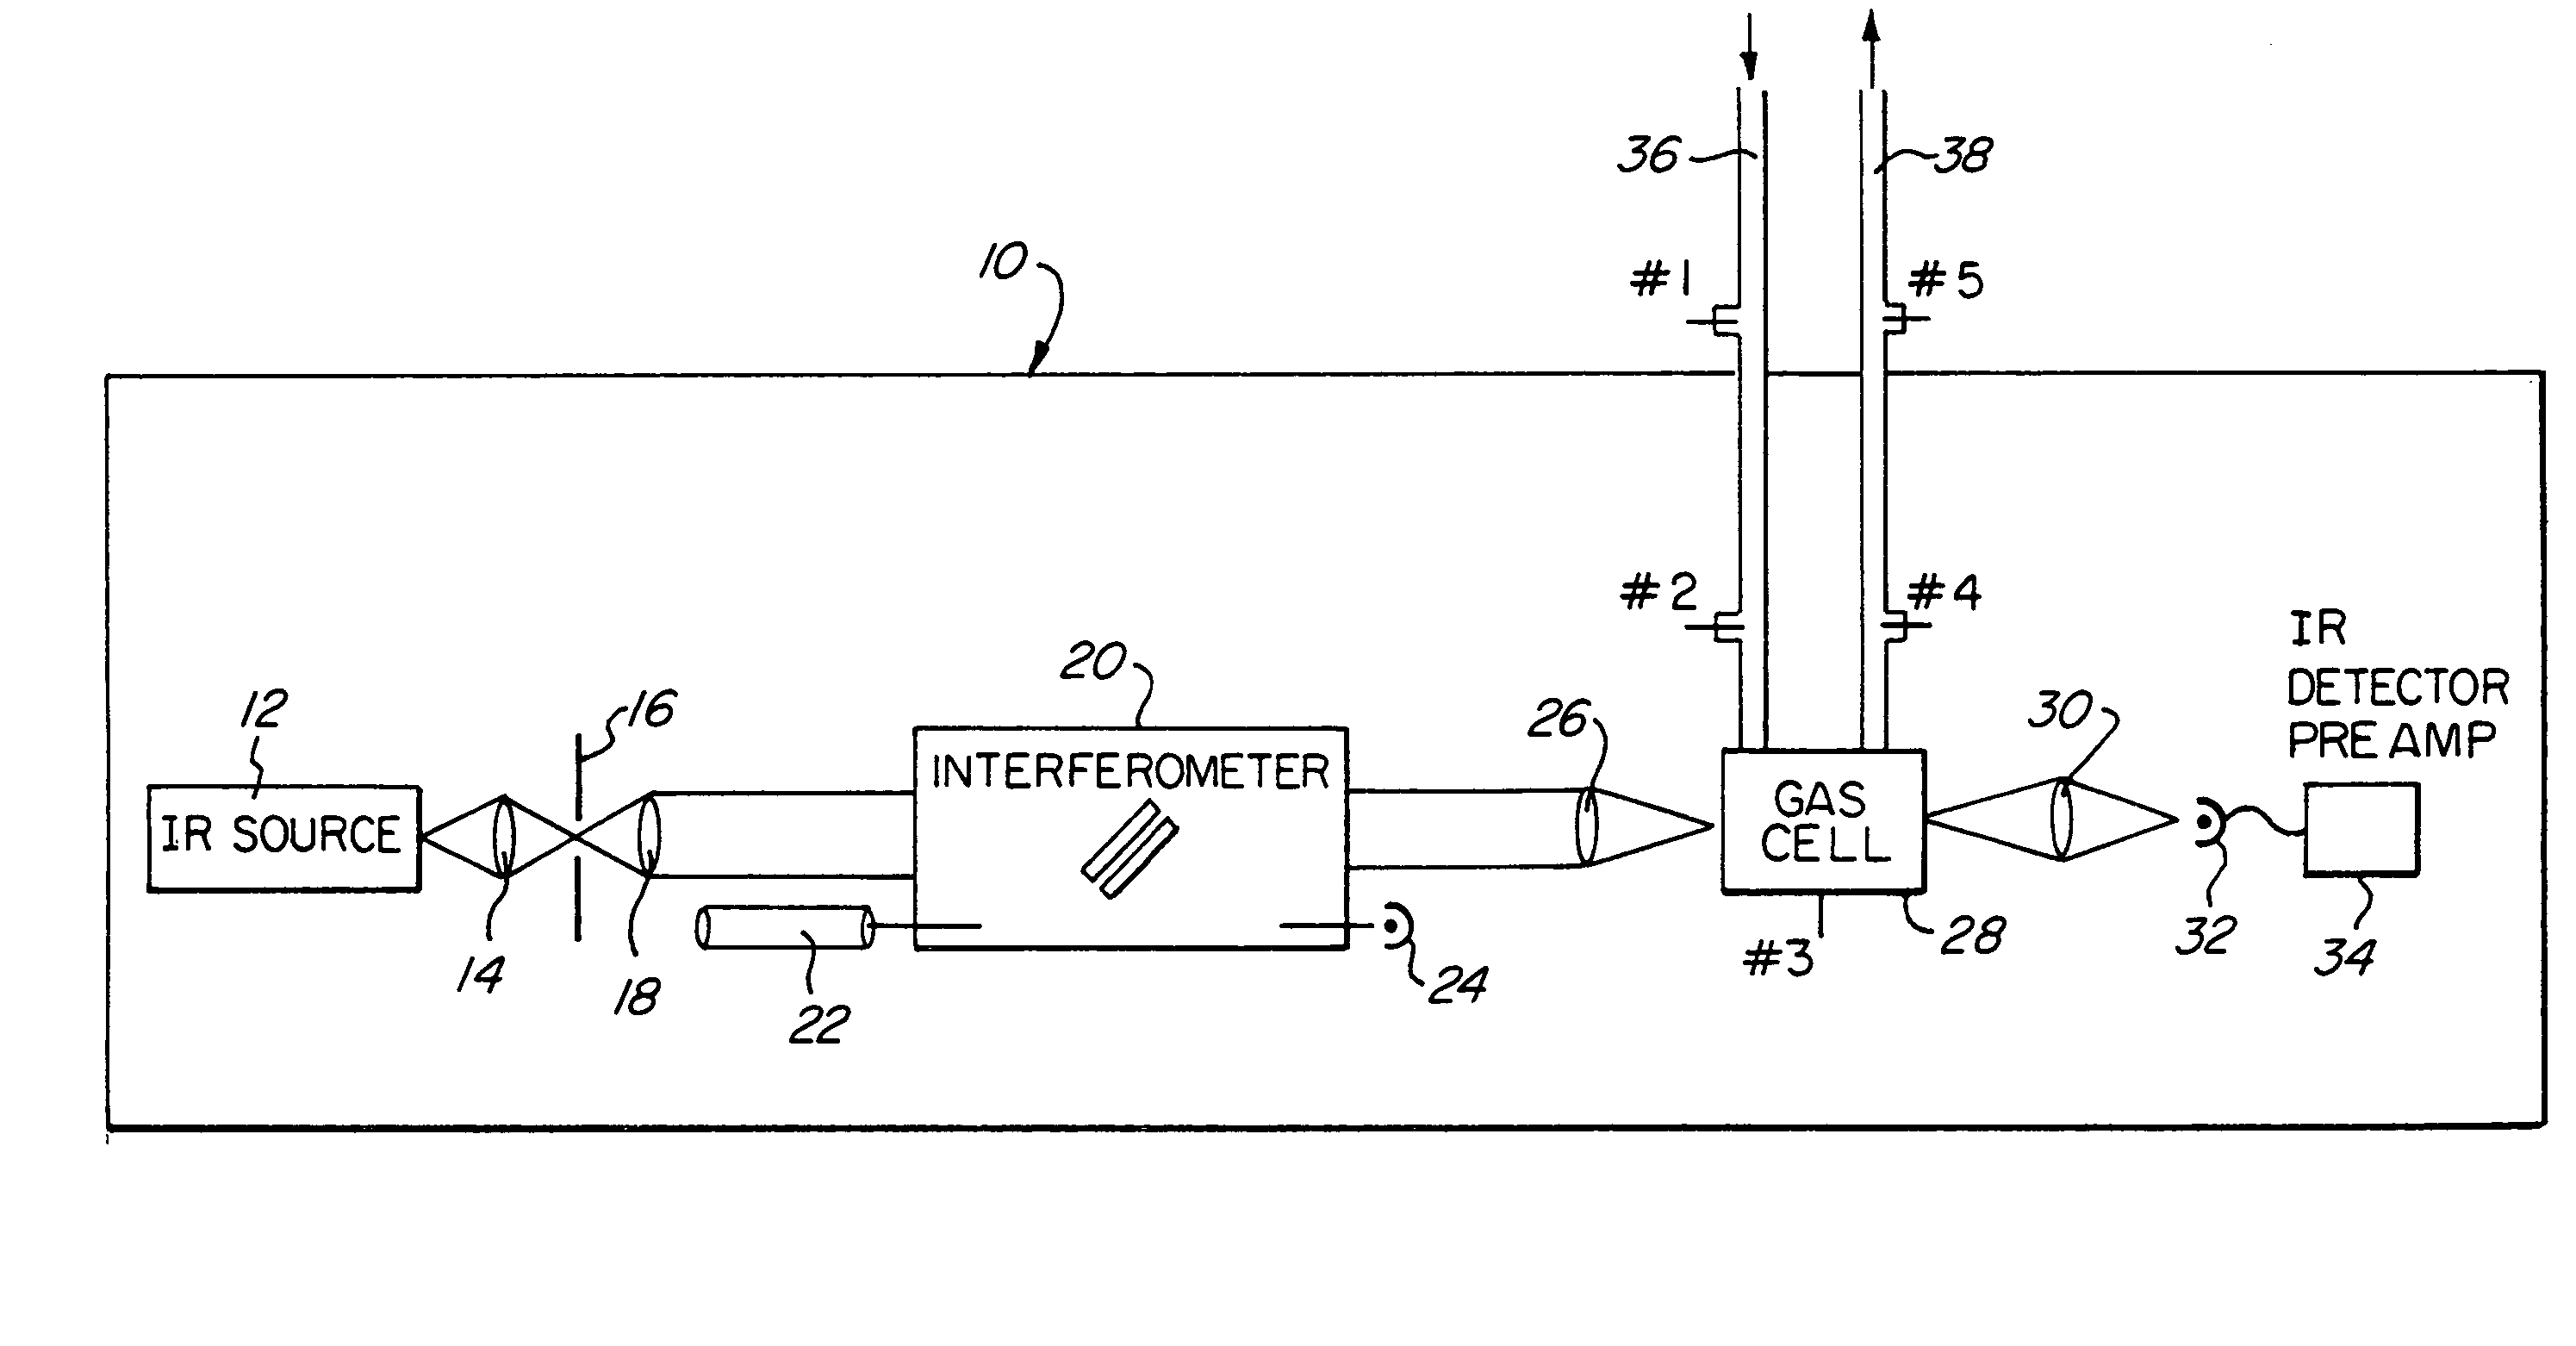 Analyzer for measuring multiple gases